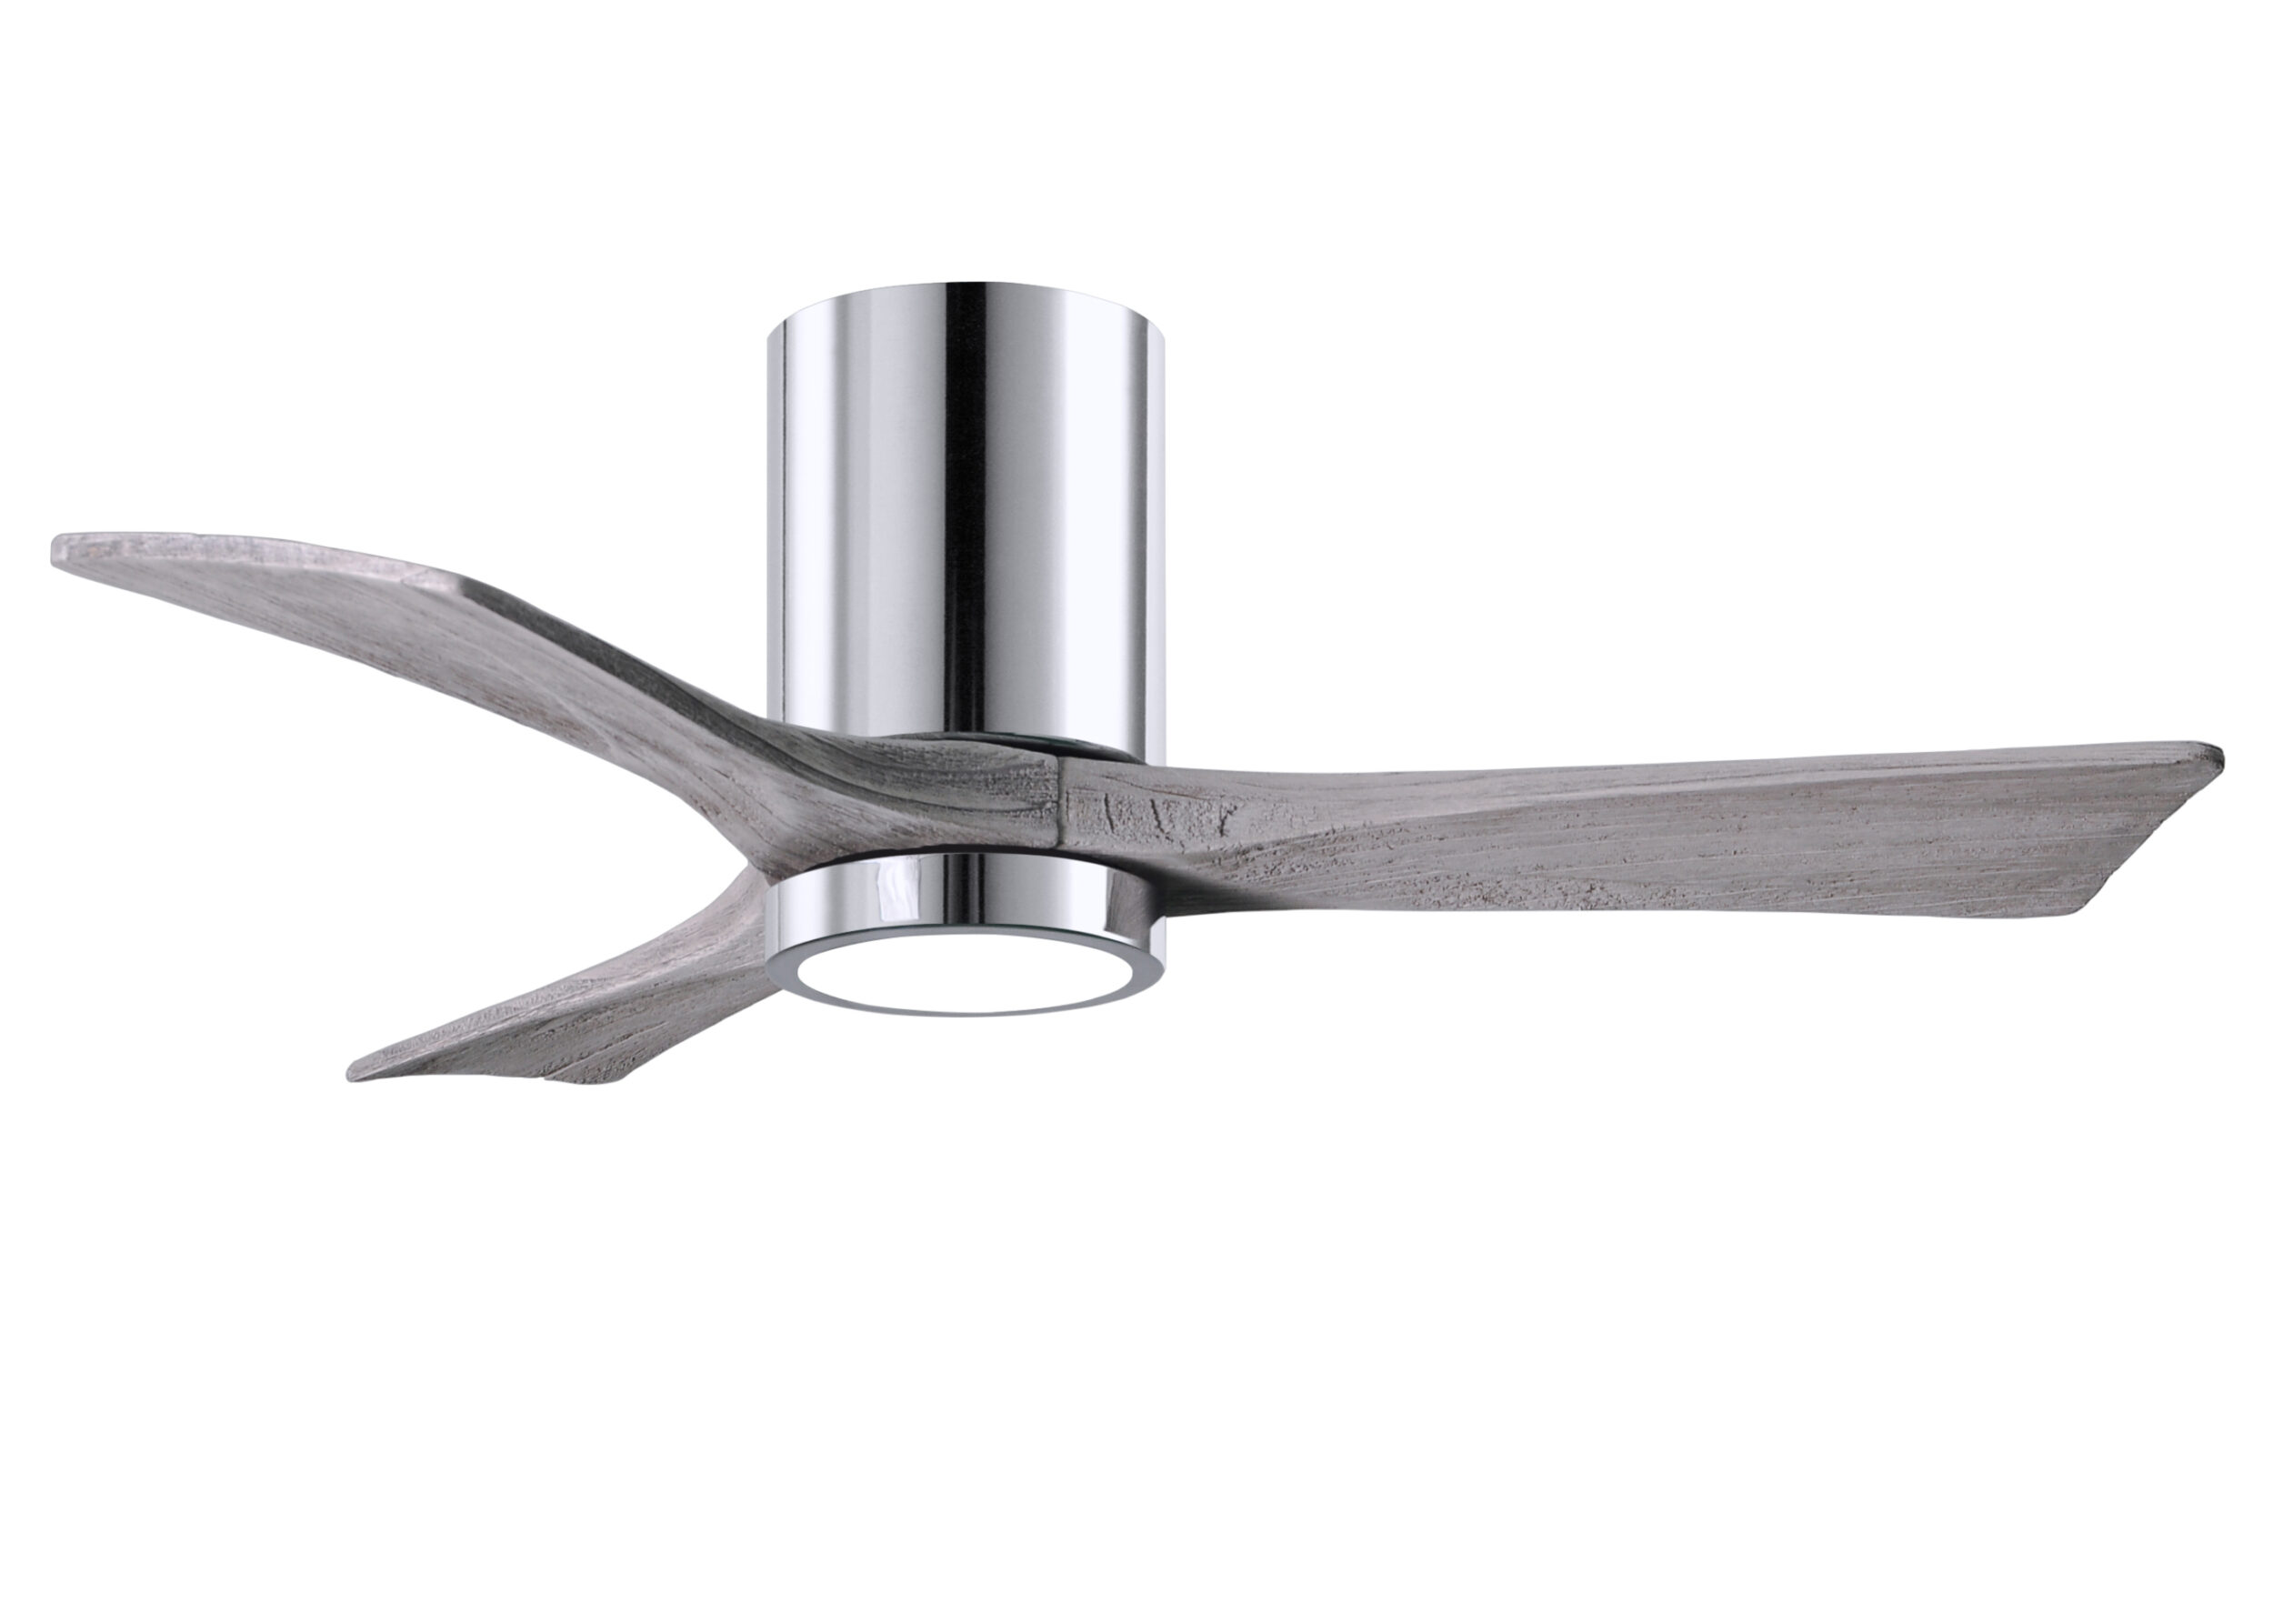 Irene-3HLK Ceiling Fan in Polished Chrome Finish with 42